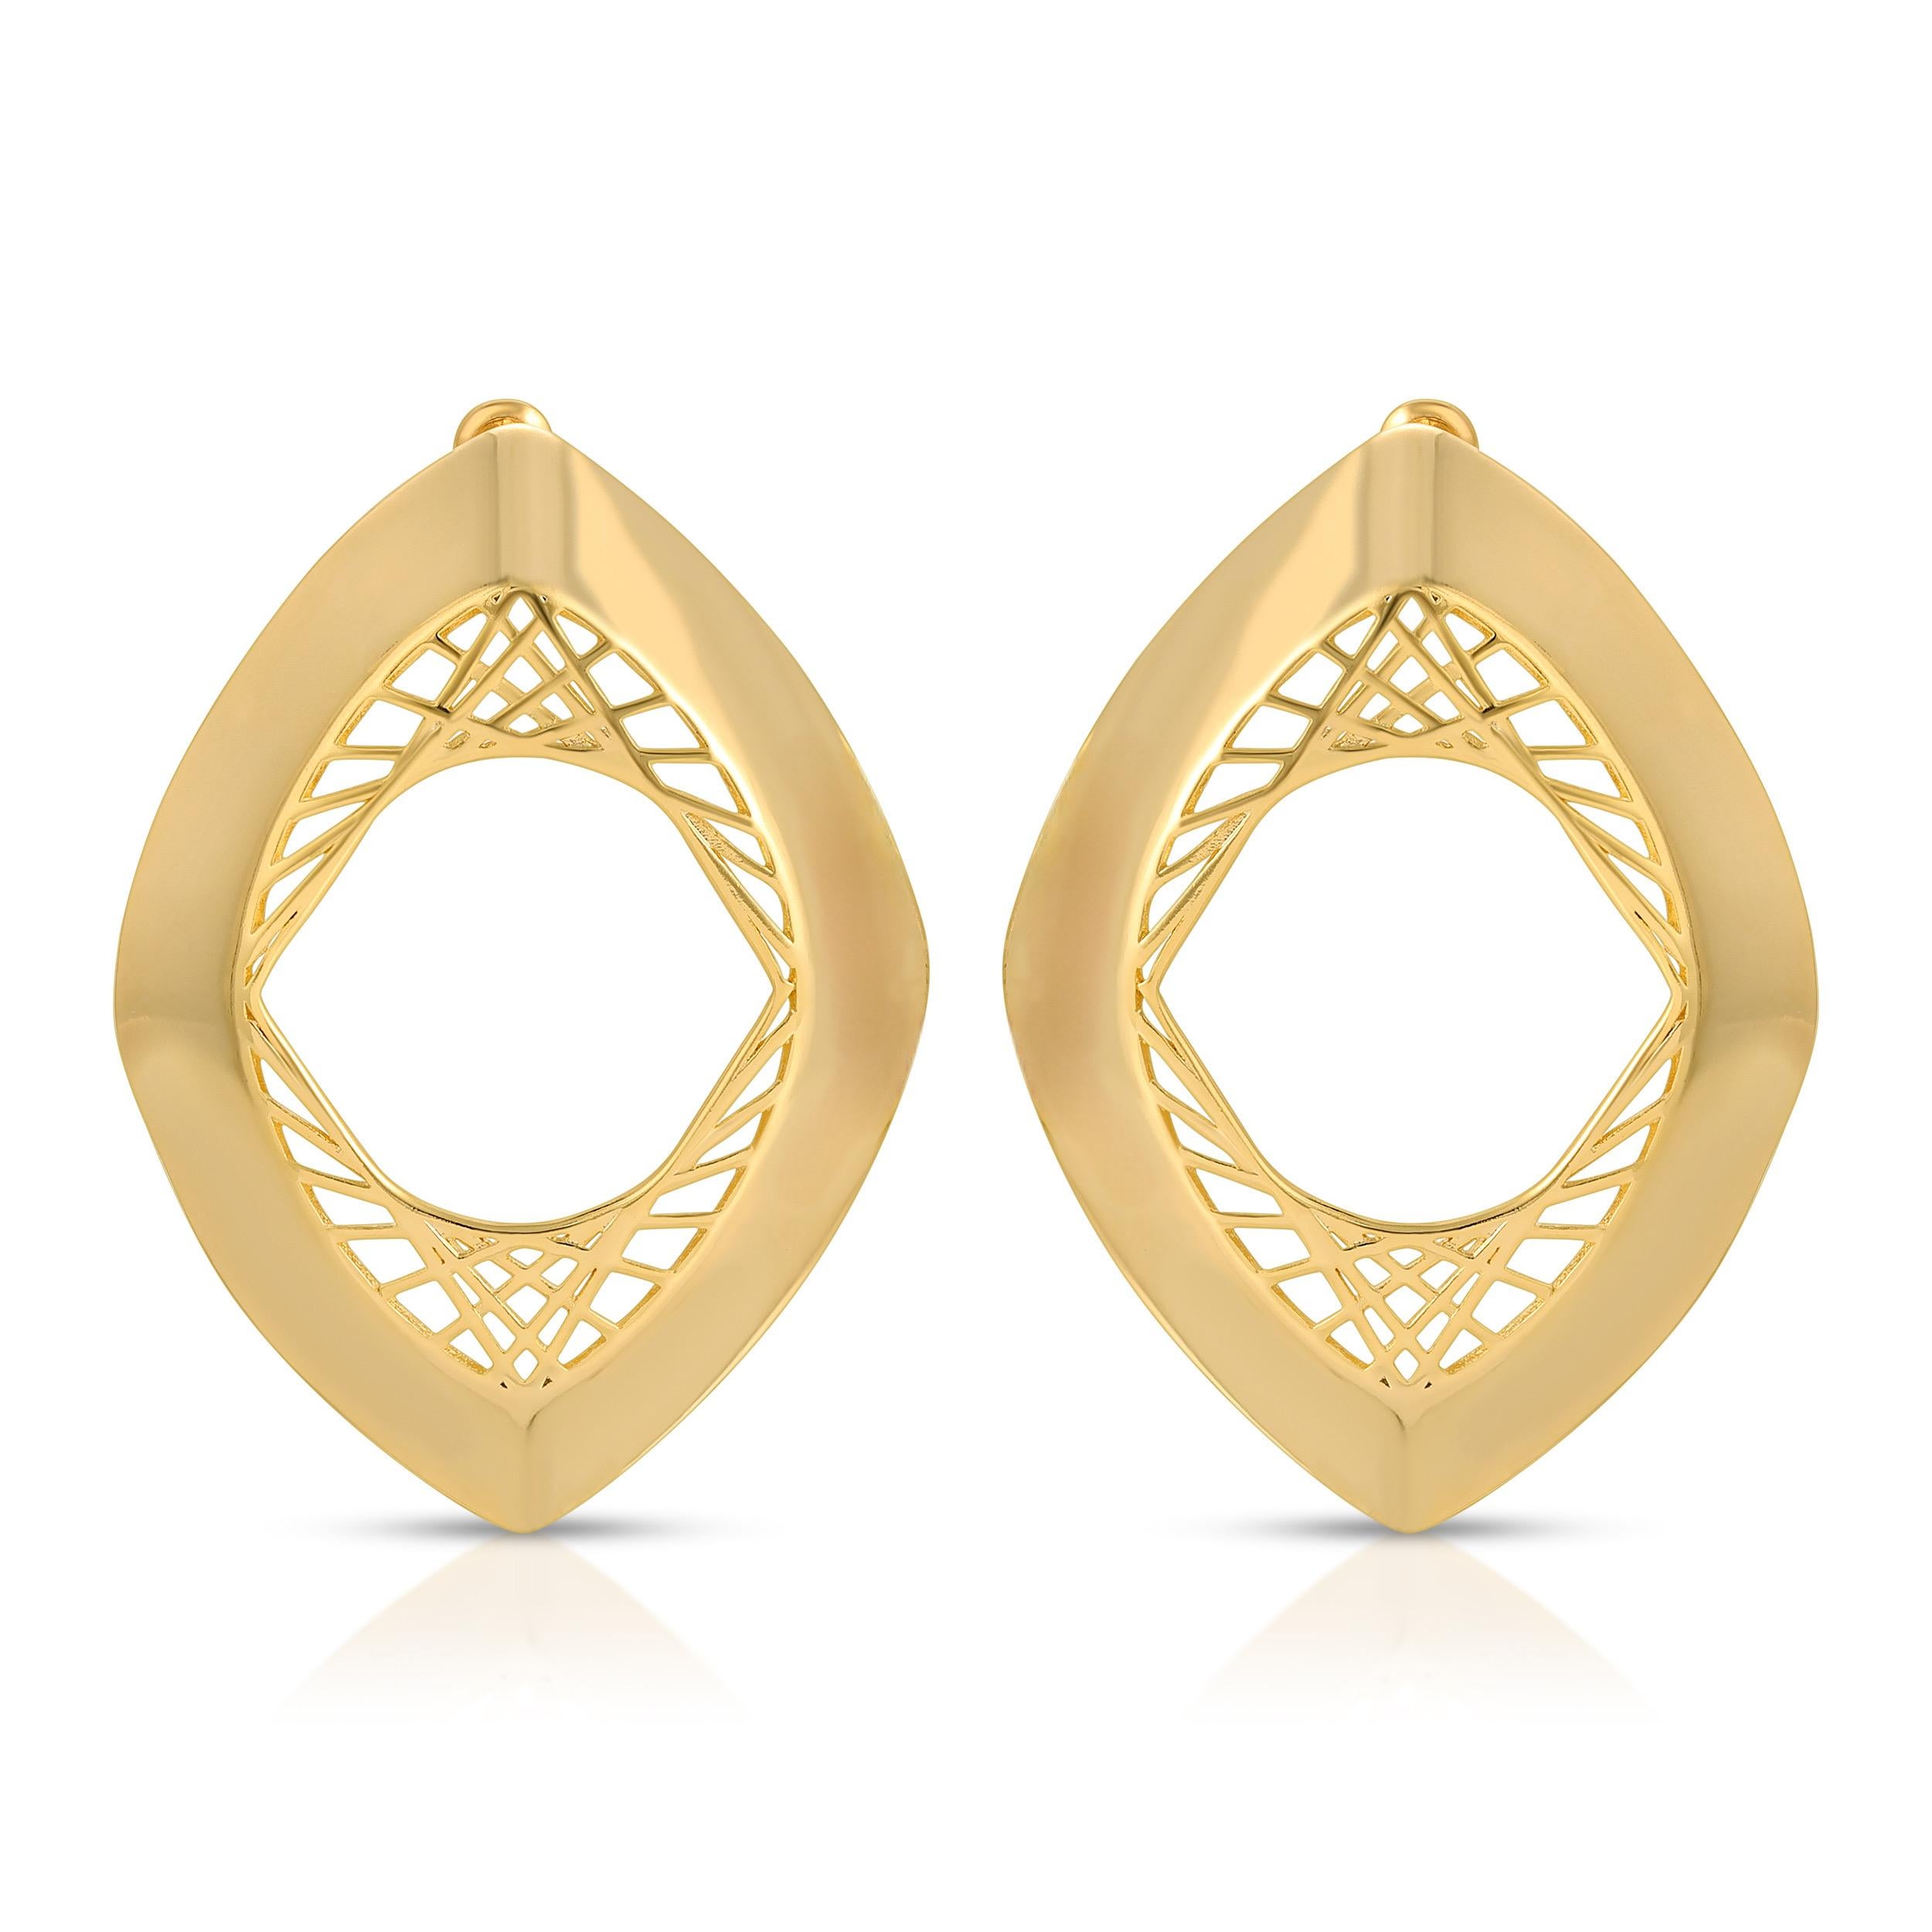 The Freedom Earrings from the Freedom Collection are inspired by Freedom tower in Tehran, Iran. Using mathematics, the detailed geometric pattern is created and finished with smooth and plain outside putting all the attention on the inside.
These